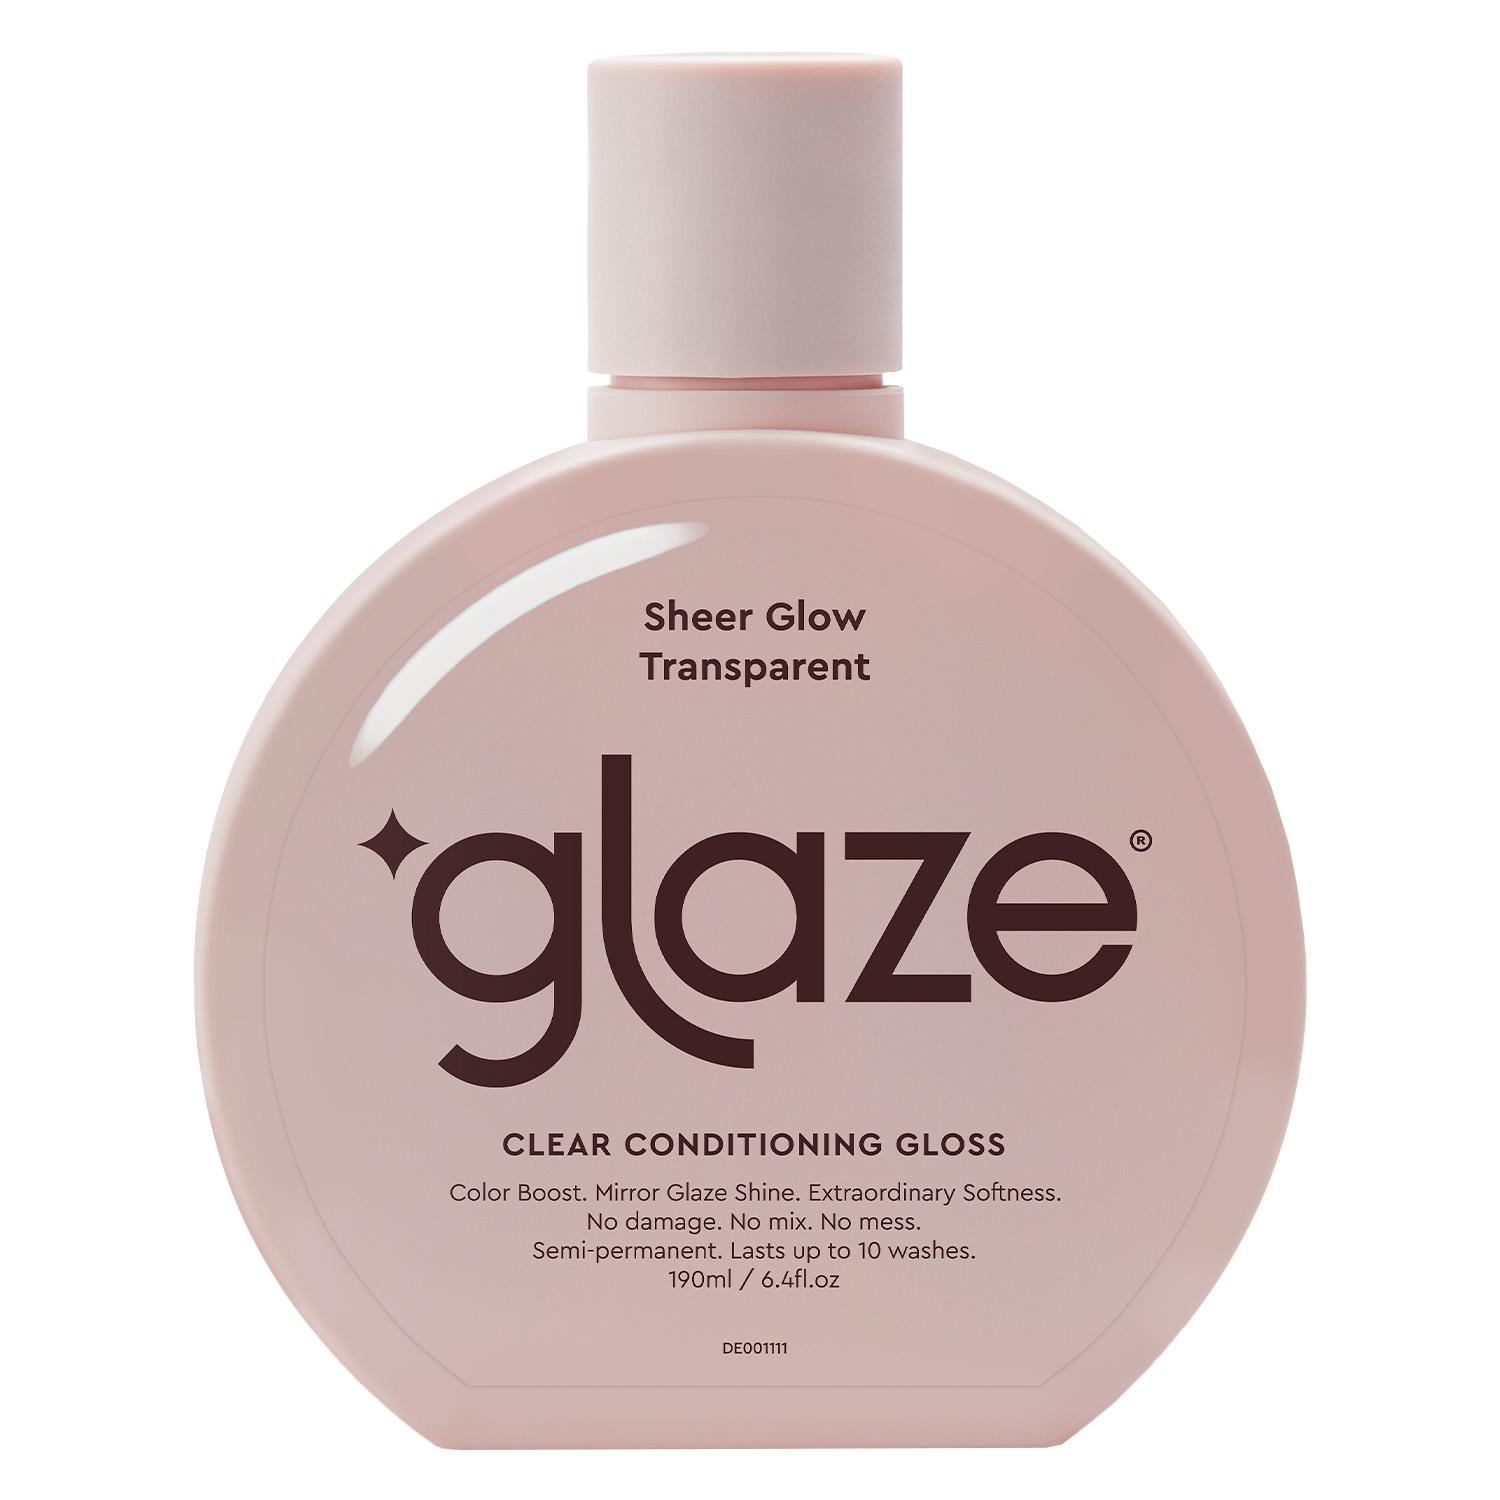 Glaze - Color Conditioning Gloss Sheer Glow